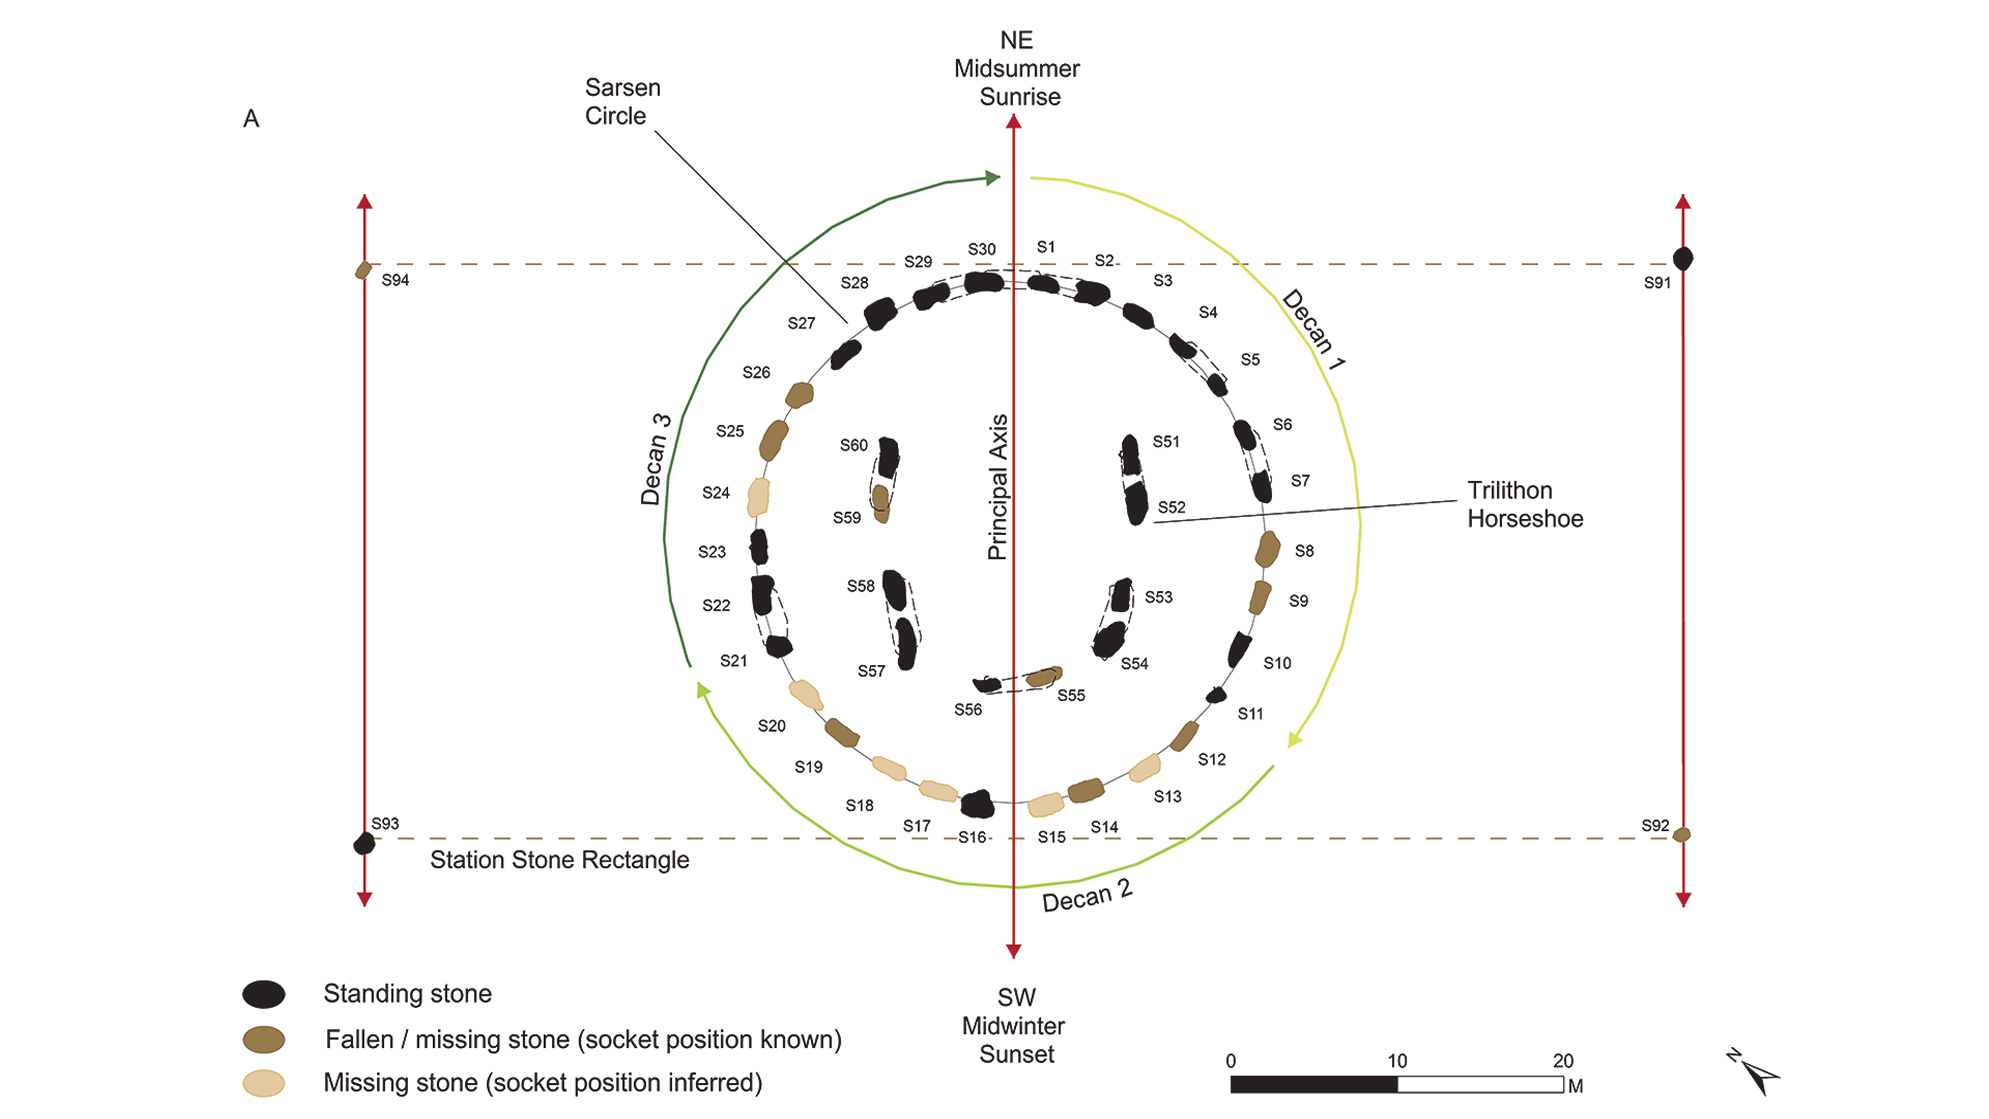 This diagram shows how the Stonehenge calendar may have worked. The 30 stones in the sarsen circle represent days which multiplied by 12 give 360. The five groups of stone in the middle represent five additional days giving 365 and the four station stones represent the need for a leap day every four years giving 365.25 days - a solar year.